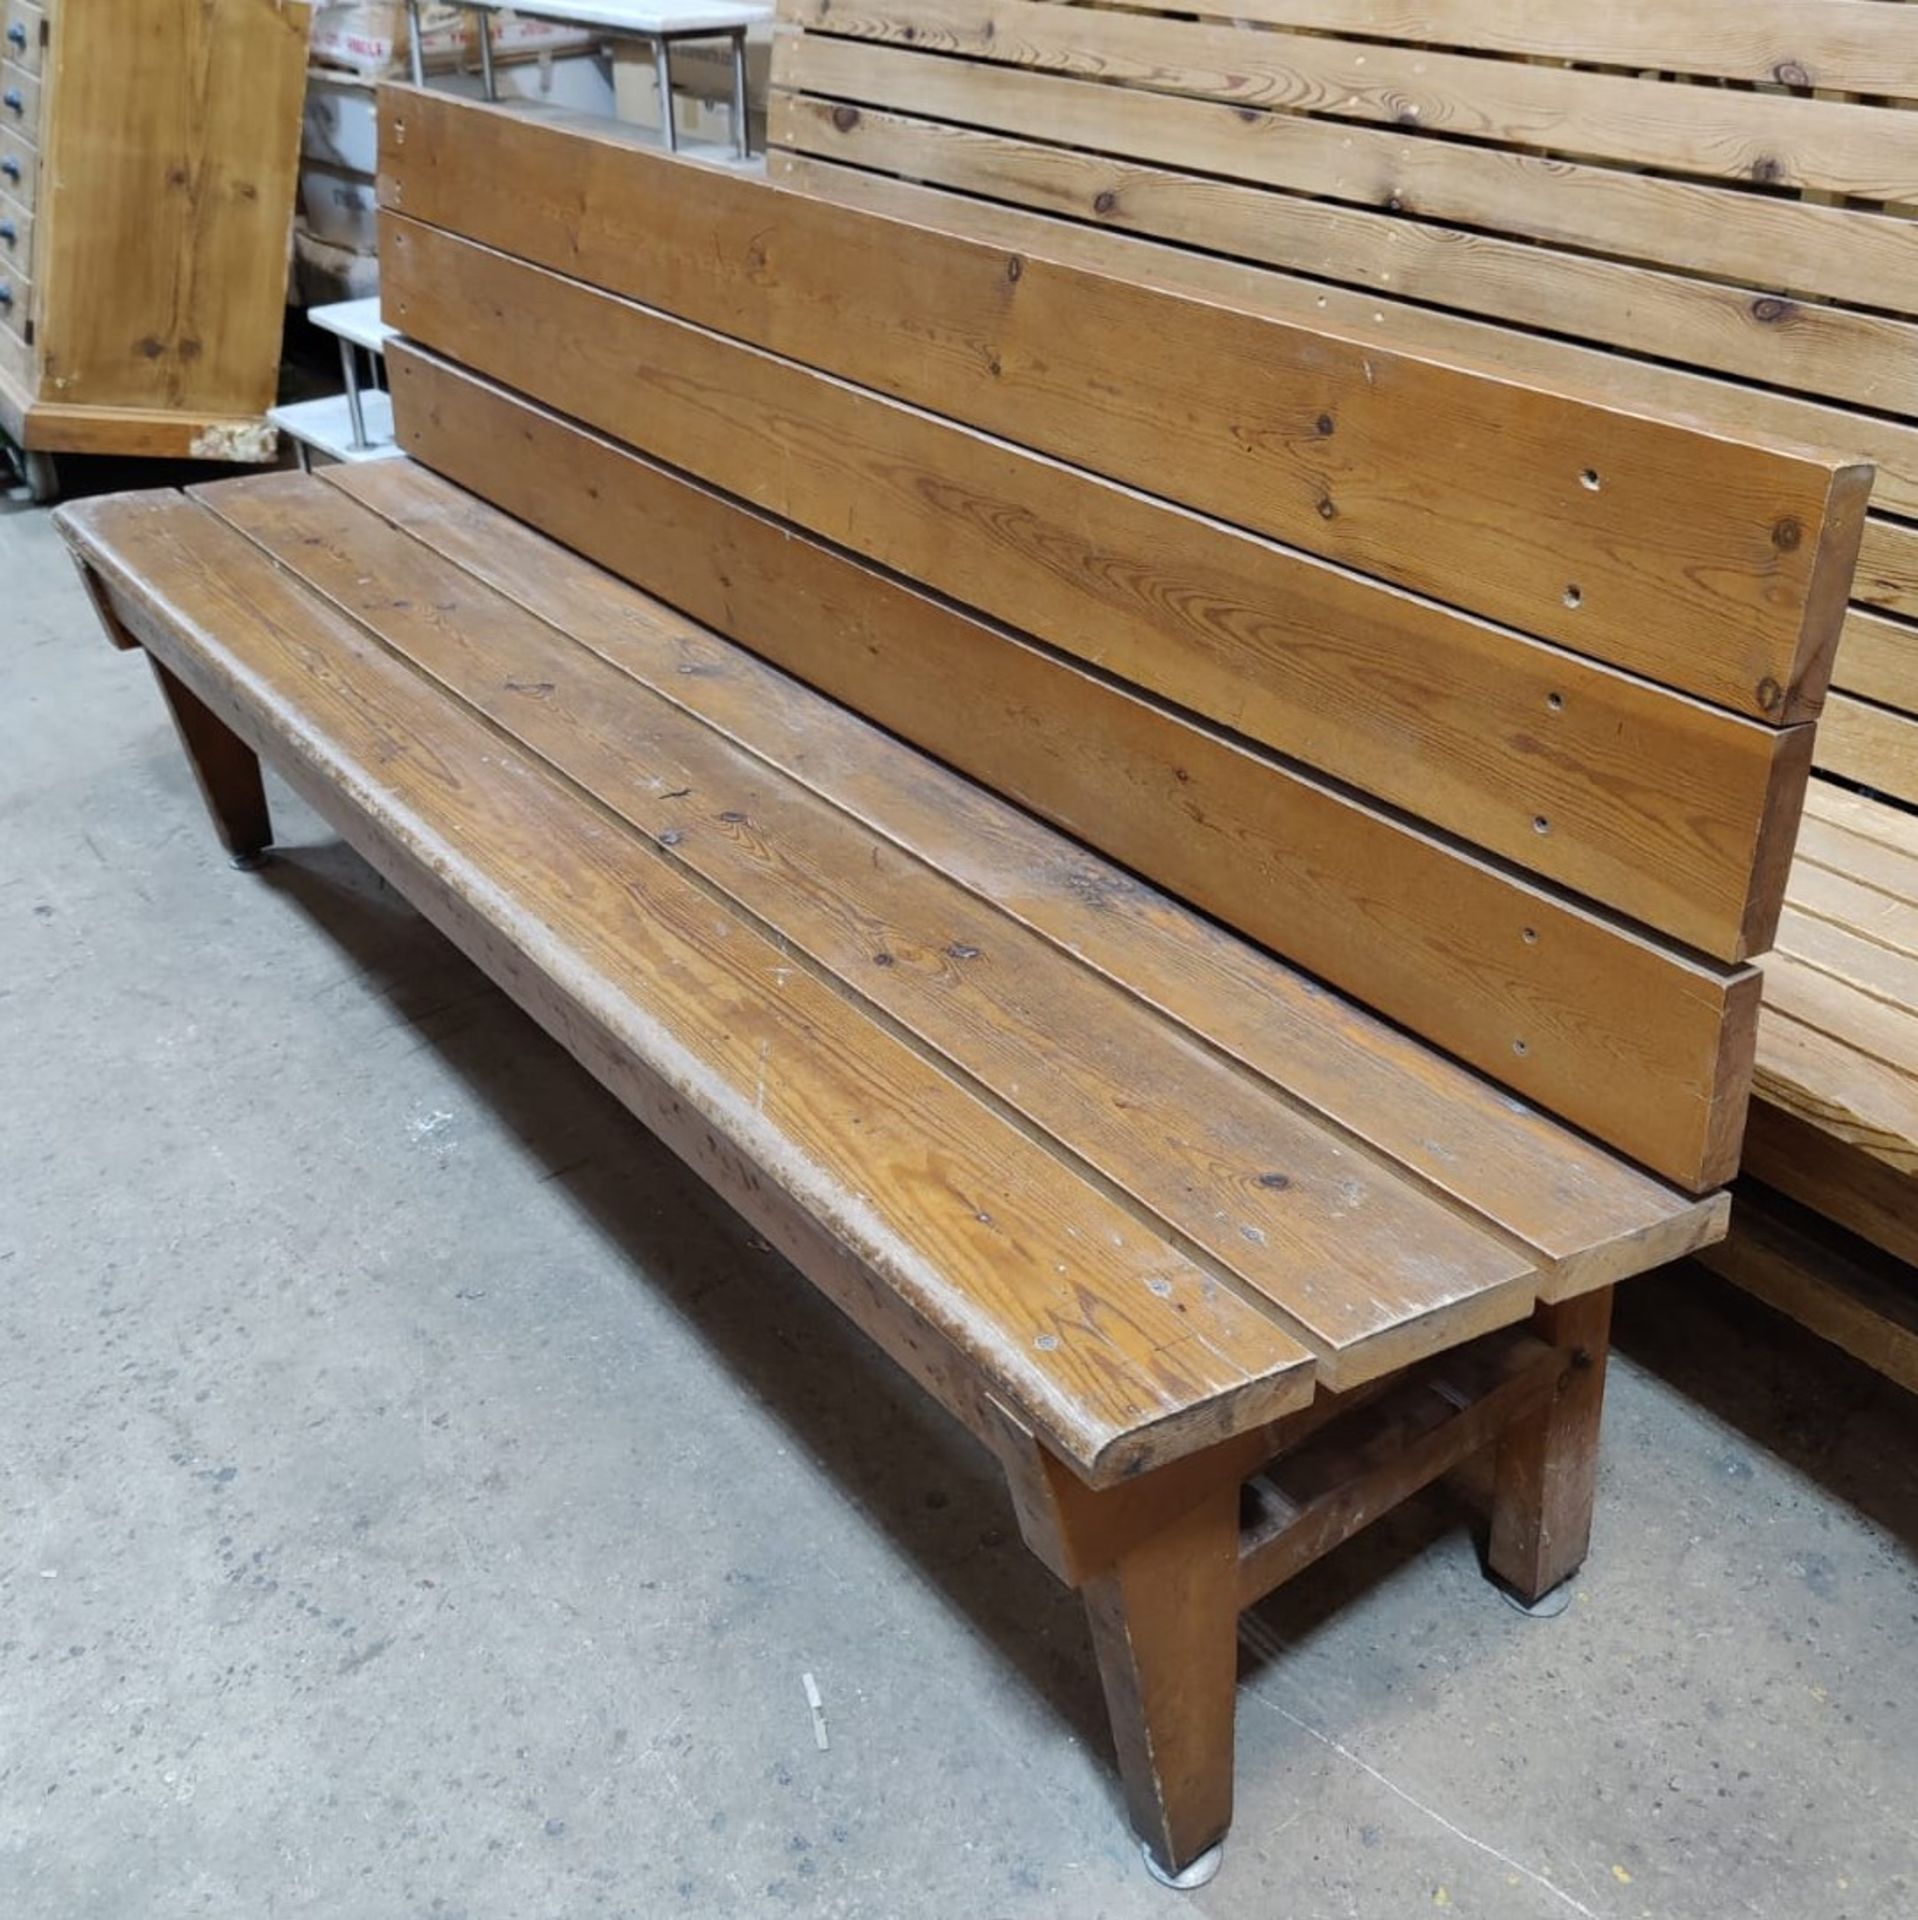 1 x Rustic Restaurant Seating Bench - Recently Removed From a Restaurant Environment - Image 4 of 6